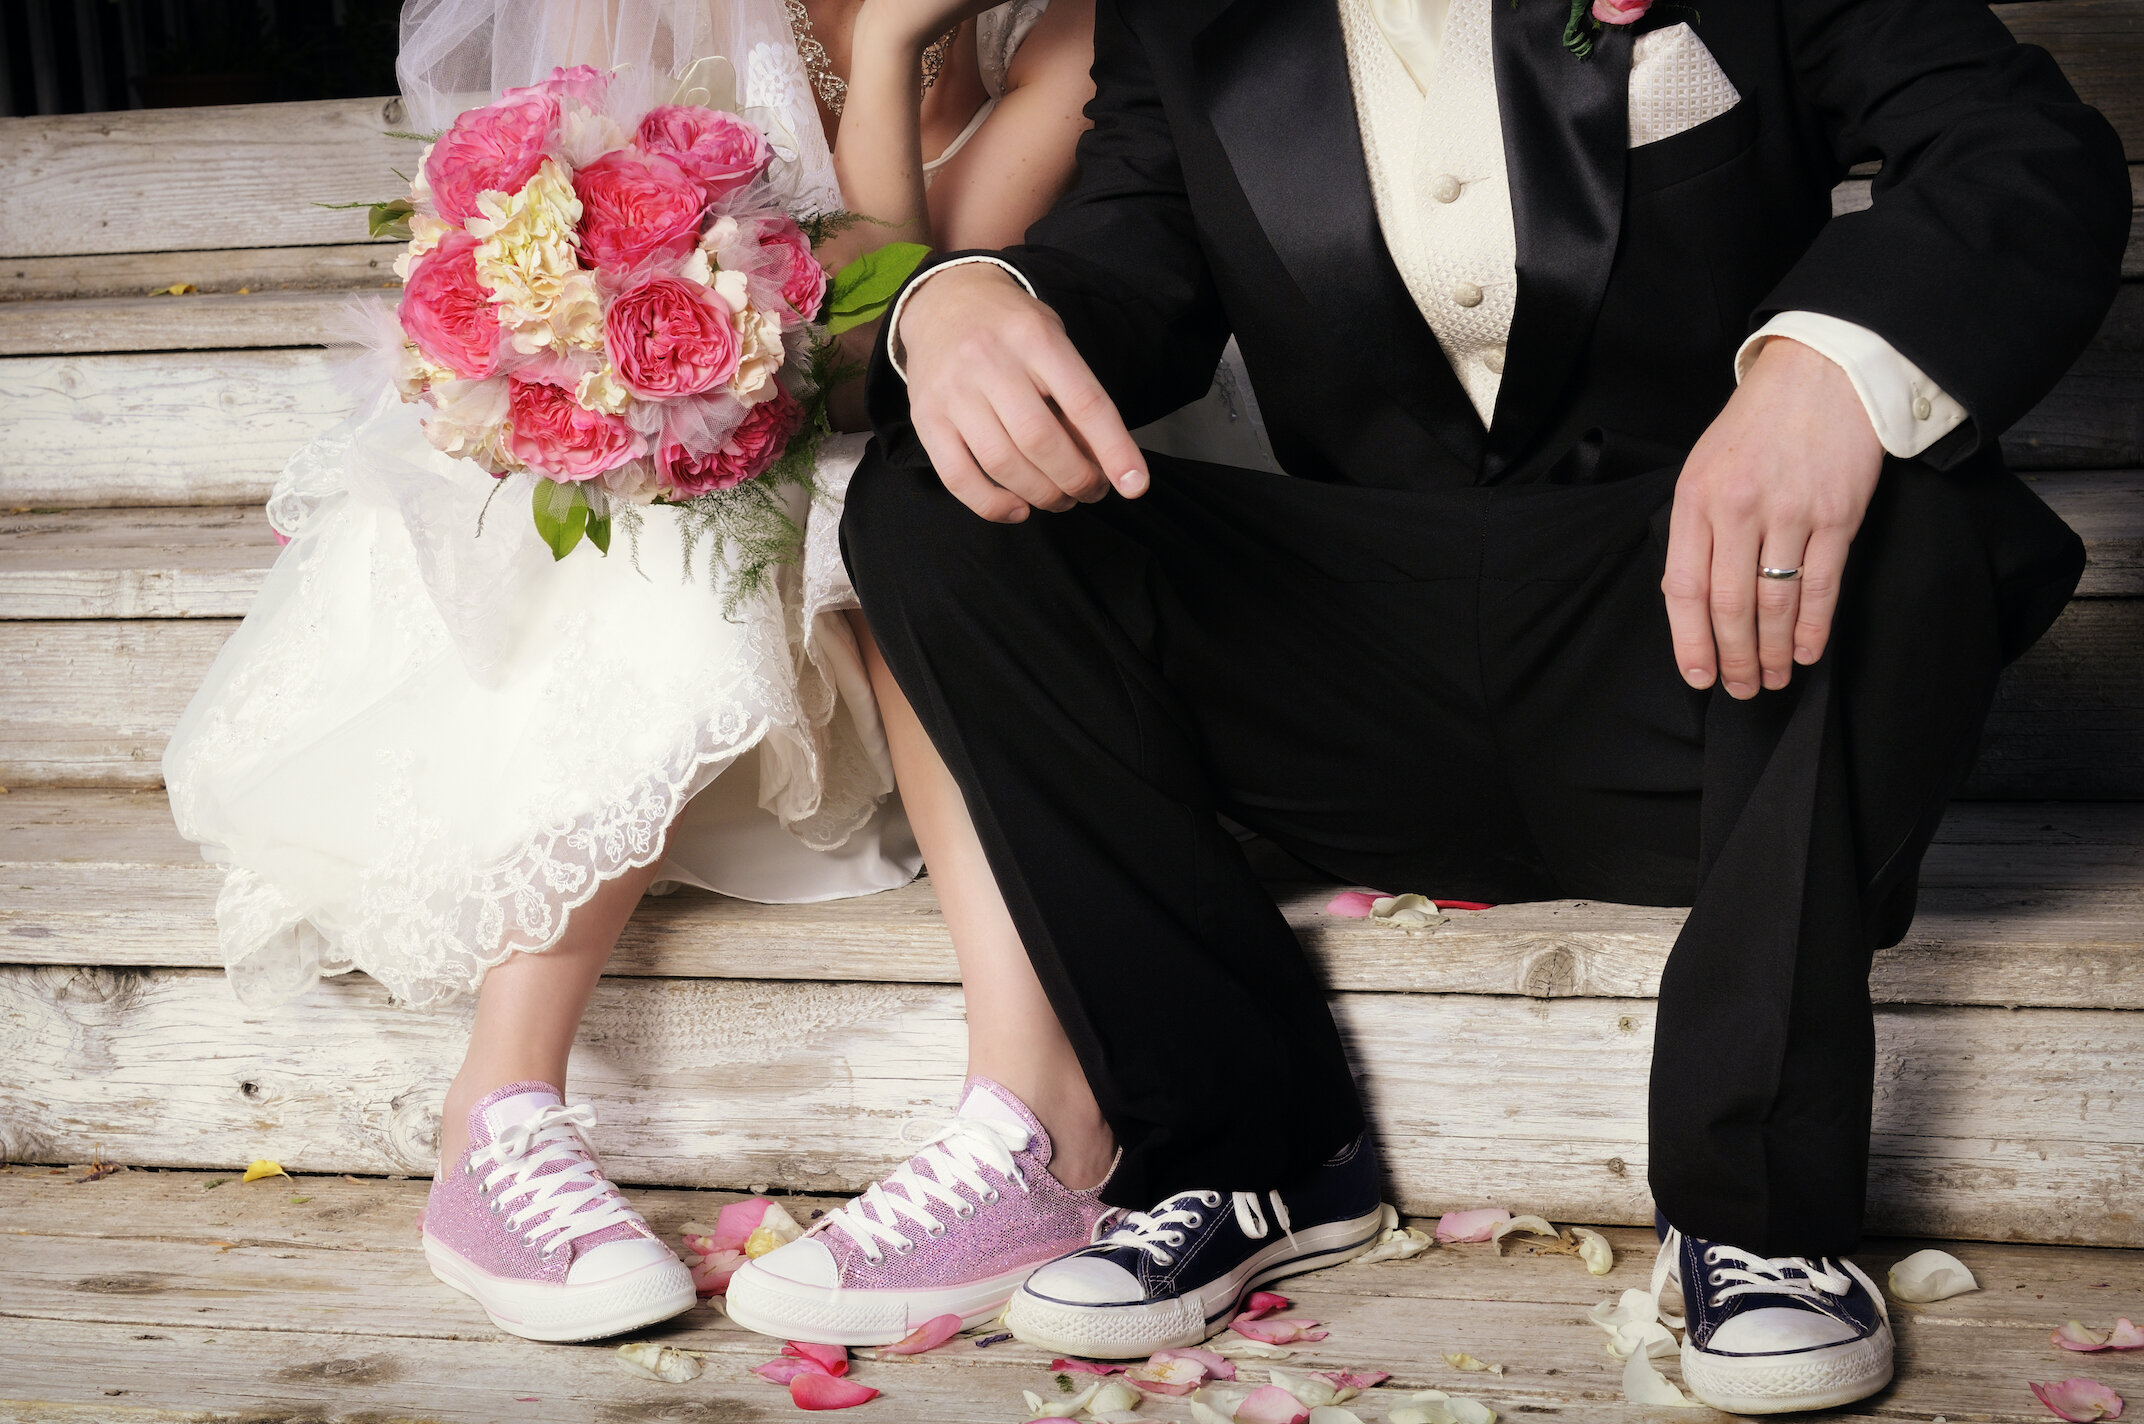 bride and groom shoes on wedding day.jpg